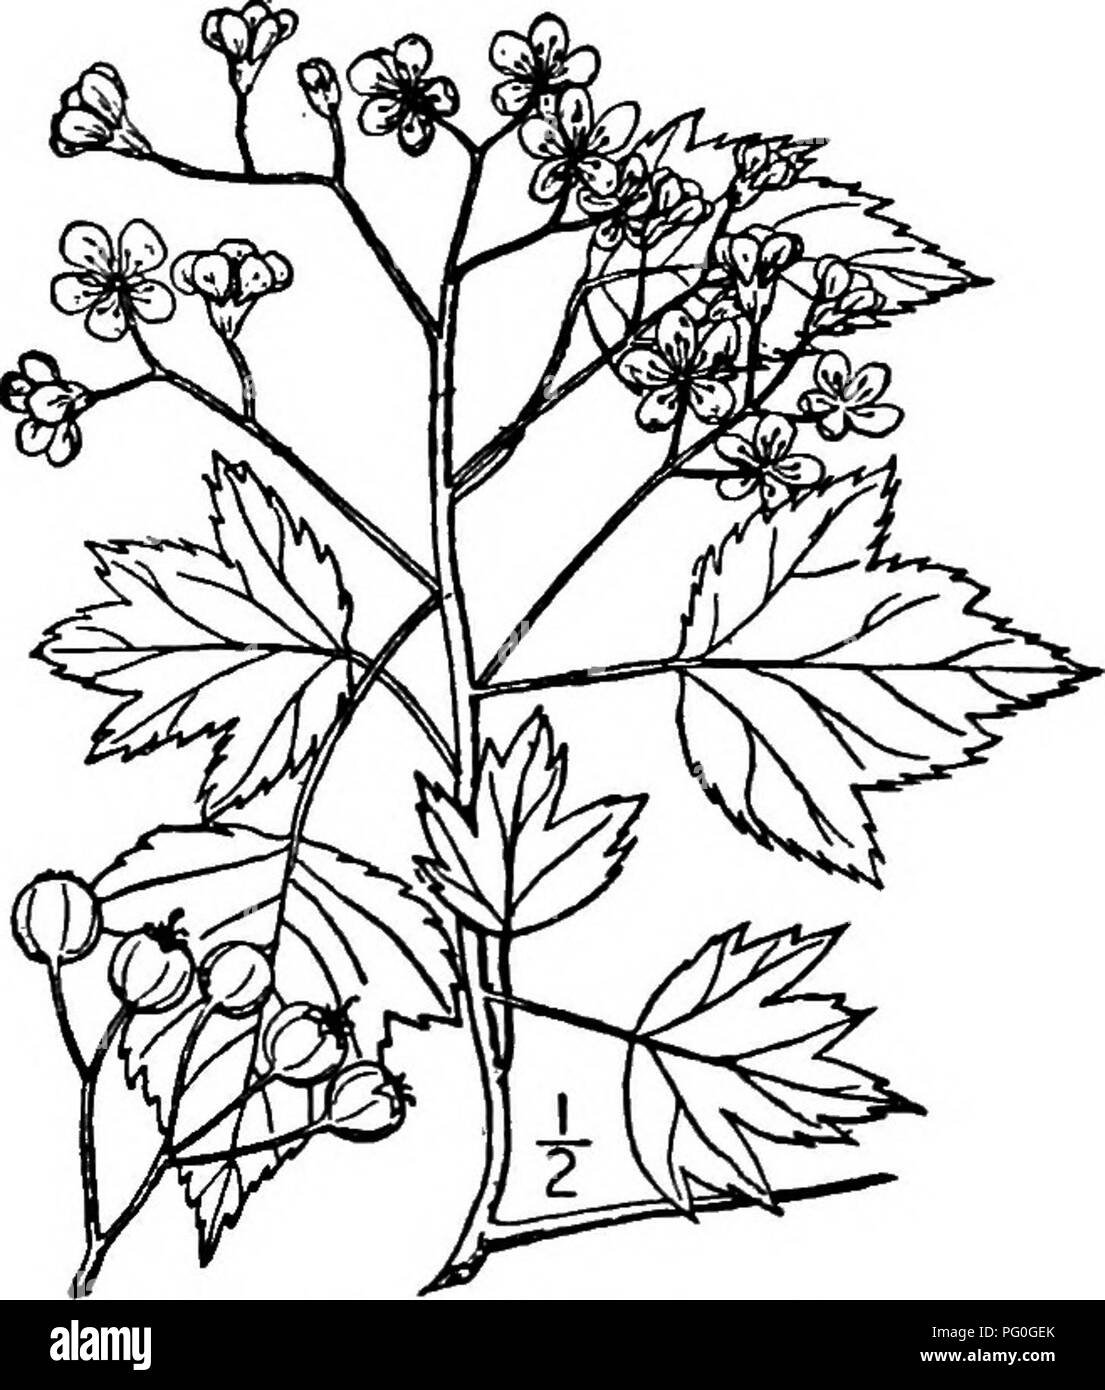 . North American trees : being descriptions and illustrations of the trees growing independently of cultivation in North America, north of Mexico and the West Indies . Trees. Fig. 426. — Woolly Thorn. 37. WASHINGTON THORN — Cratagus Phanopyrum (Linnaeus fils) Medicus Cratcegus cordata Aiton, not Mespilus cordata Miller. Mespilus Phcenopyrum Linnaeus fils This species grows in moist, rich soil along streams, from Virginia, south along the foothills of the Appalachian Mountains to northern Georgia and Alabama, and from the lower Wabash valley in Illinois to south- em Missouri and northwestern Ar Stock Photo